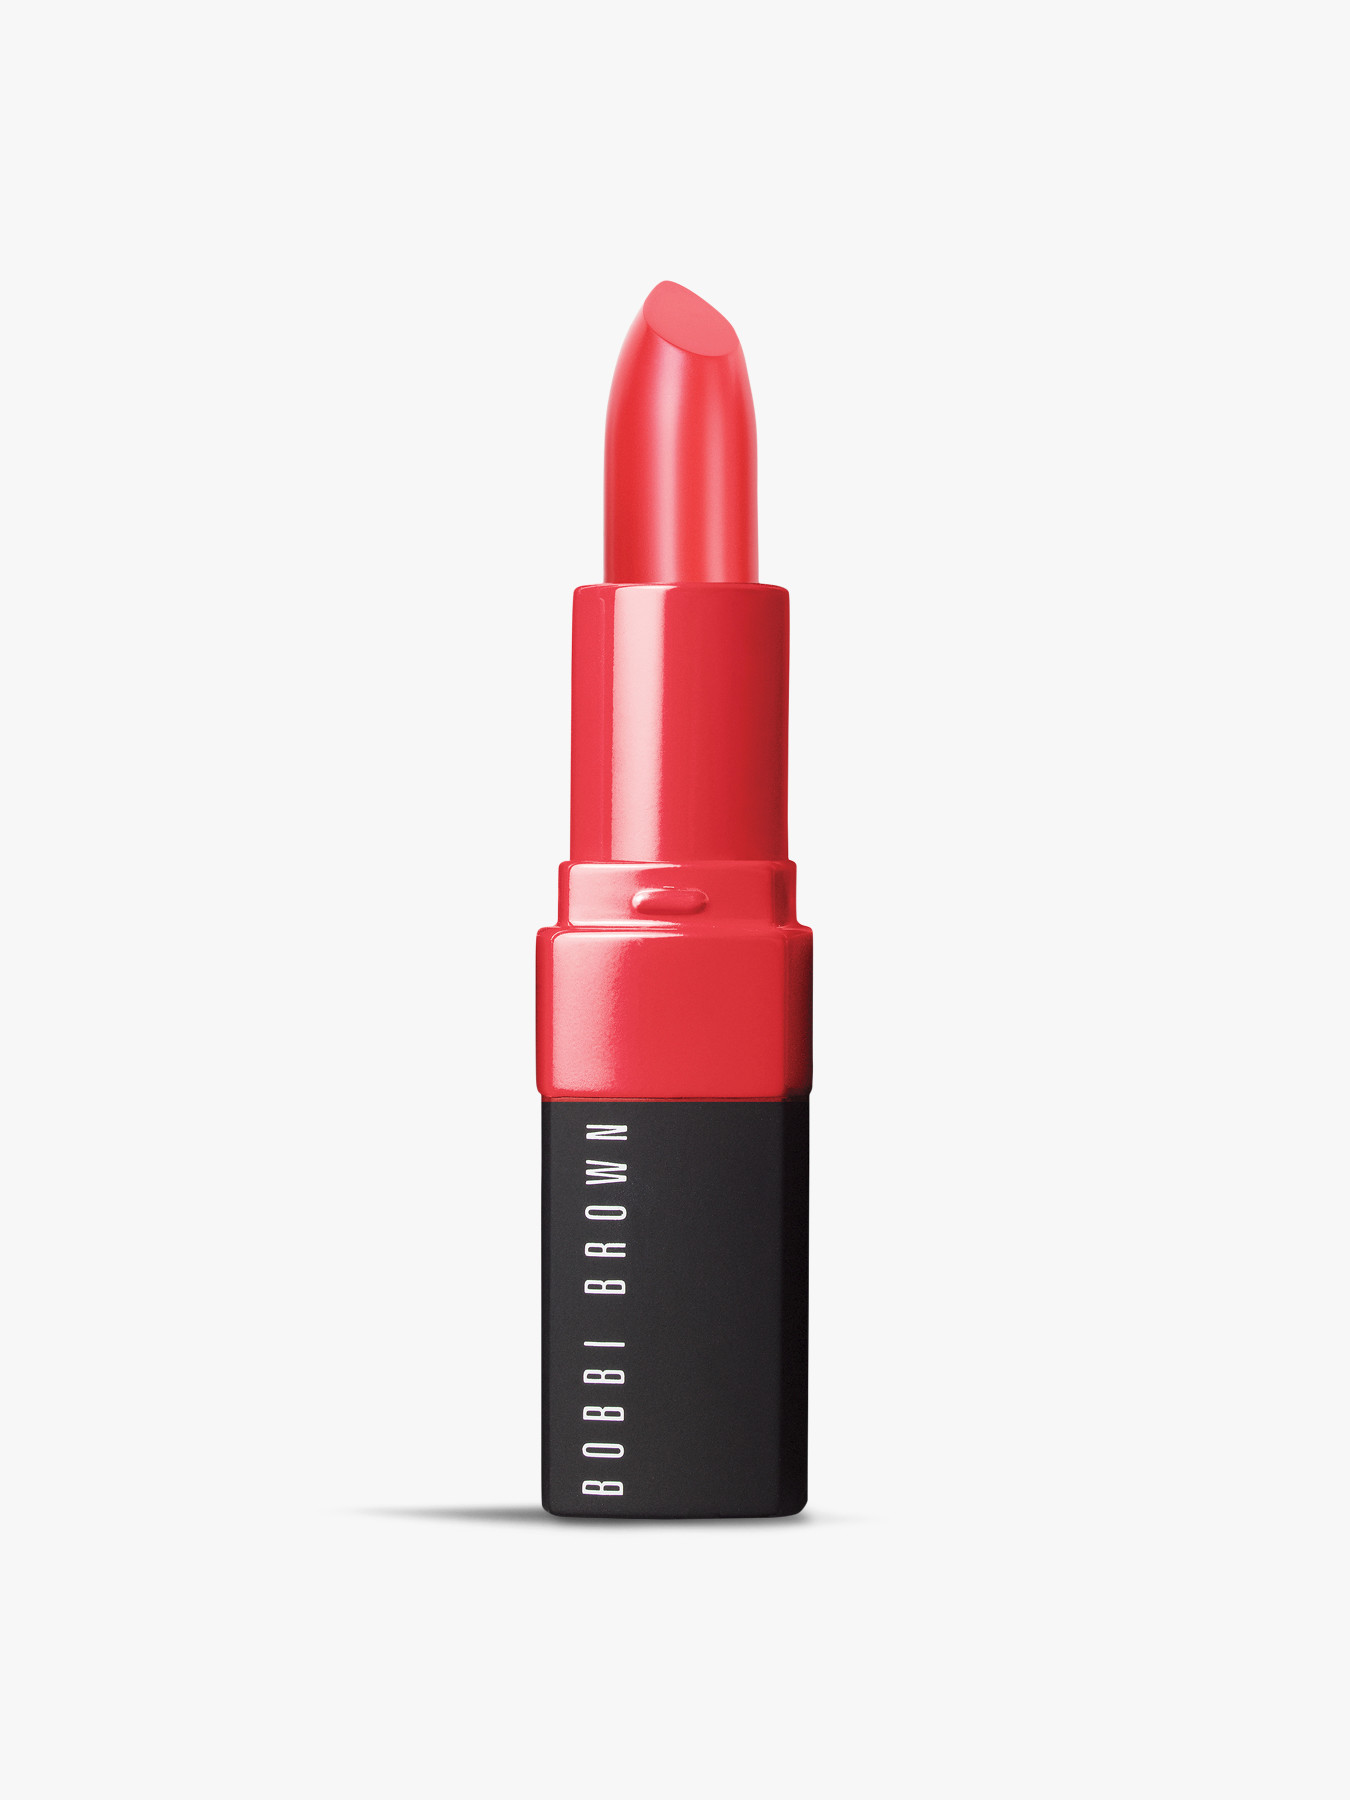 Bobbi Brown Crushed Lip Colour Molly Wow